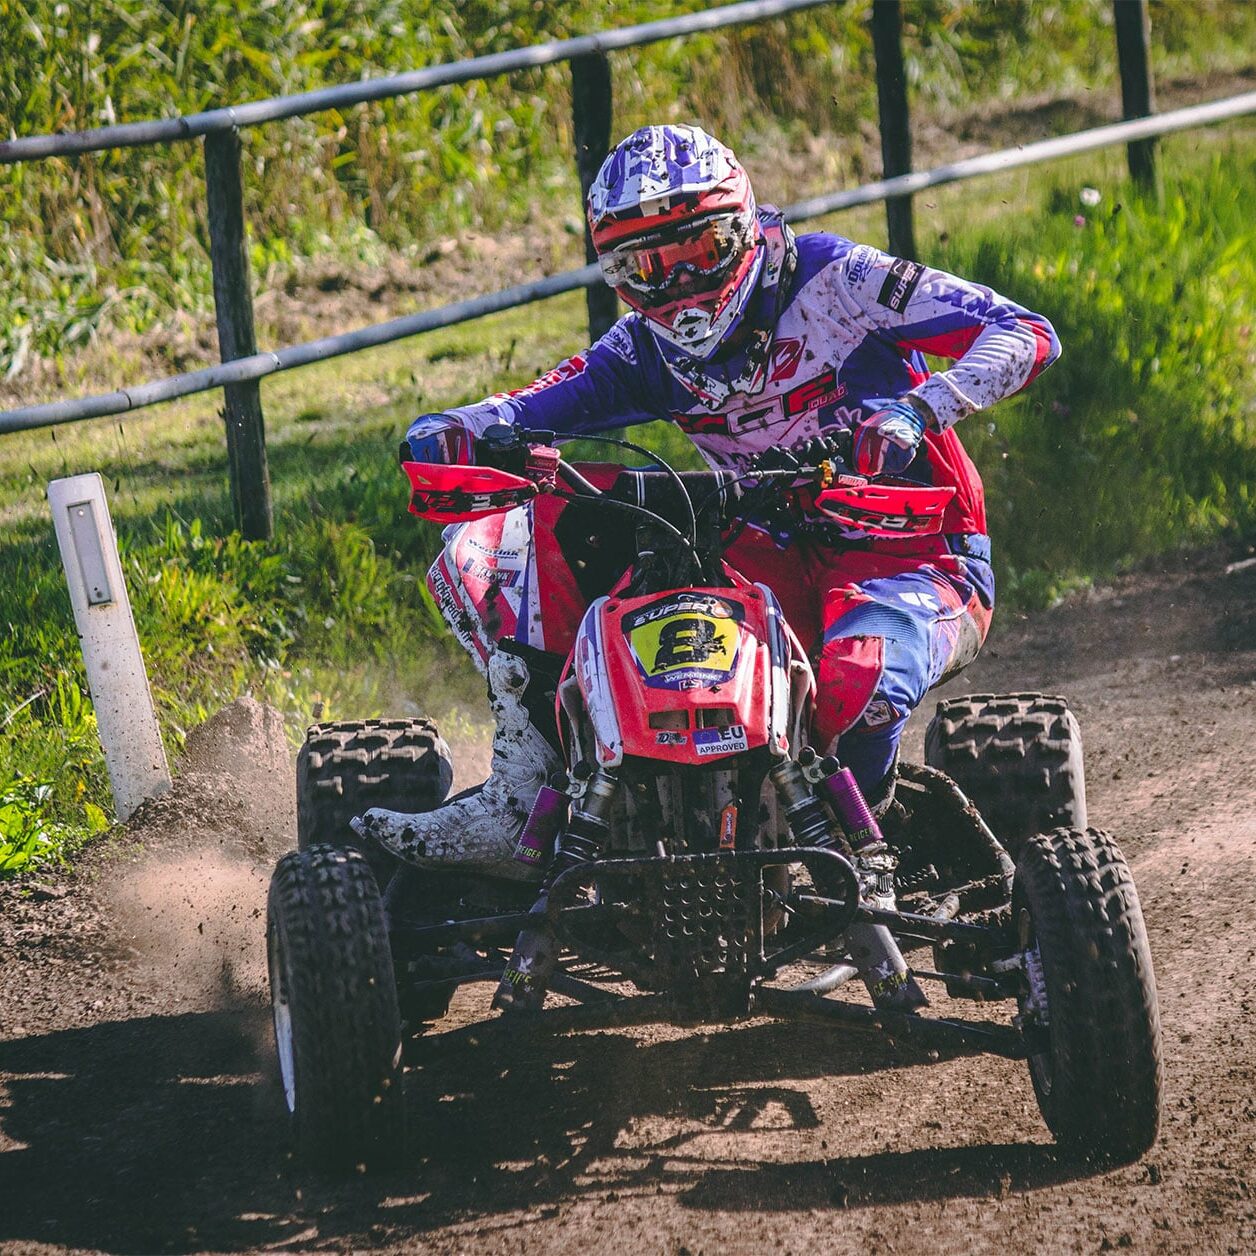 quad bike rider racing on a dirt track on a sunny day